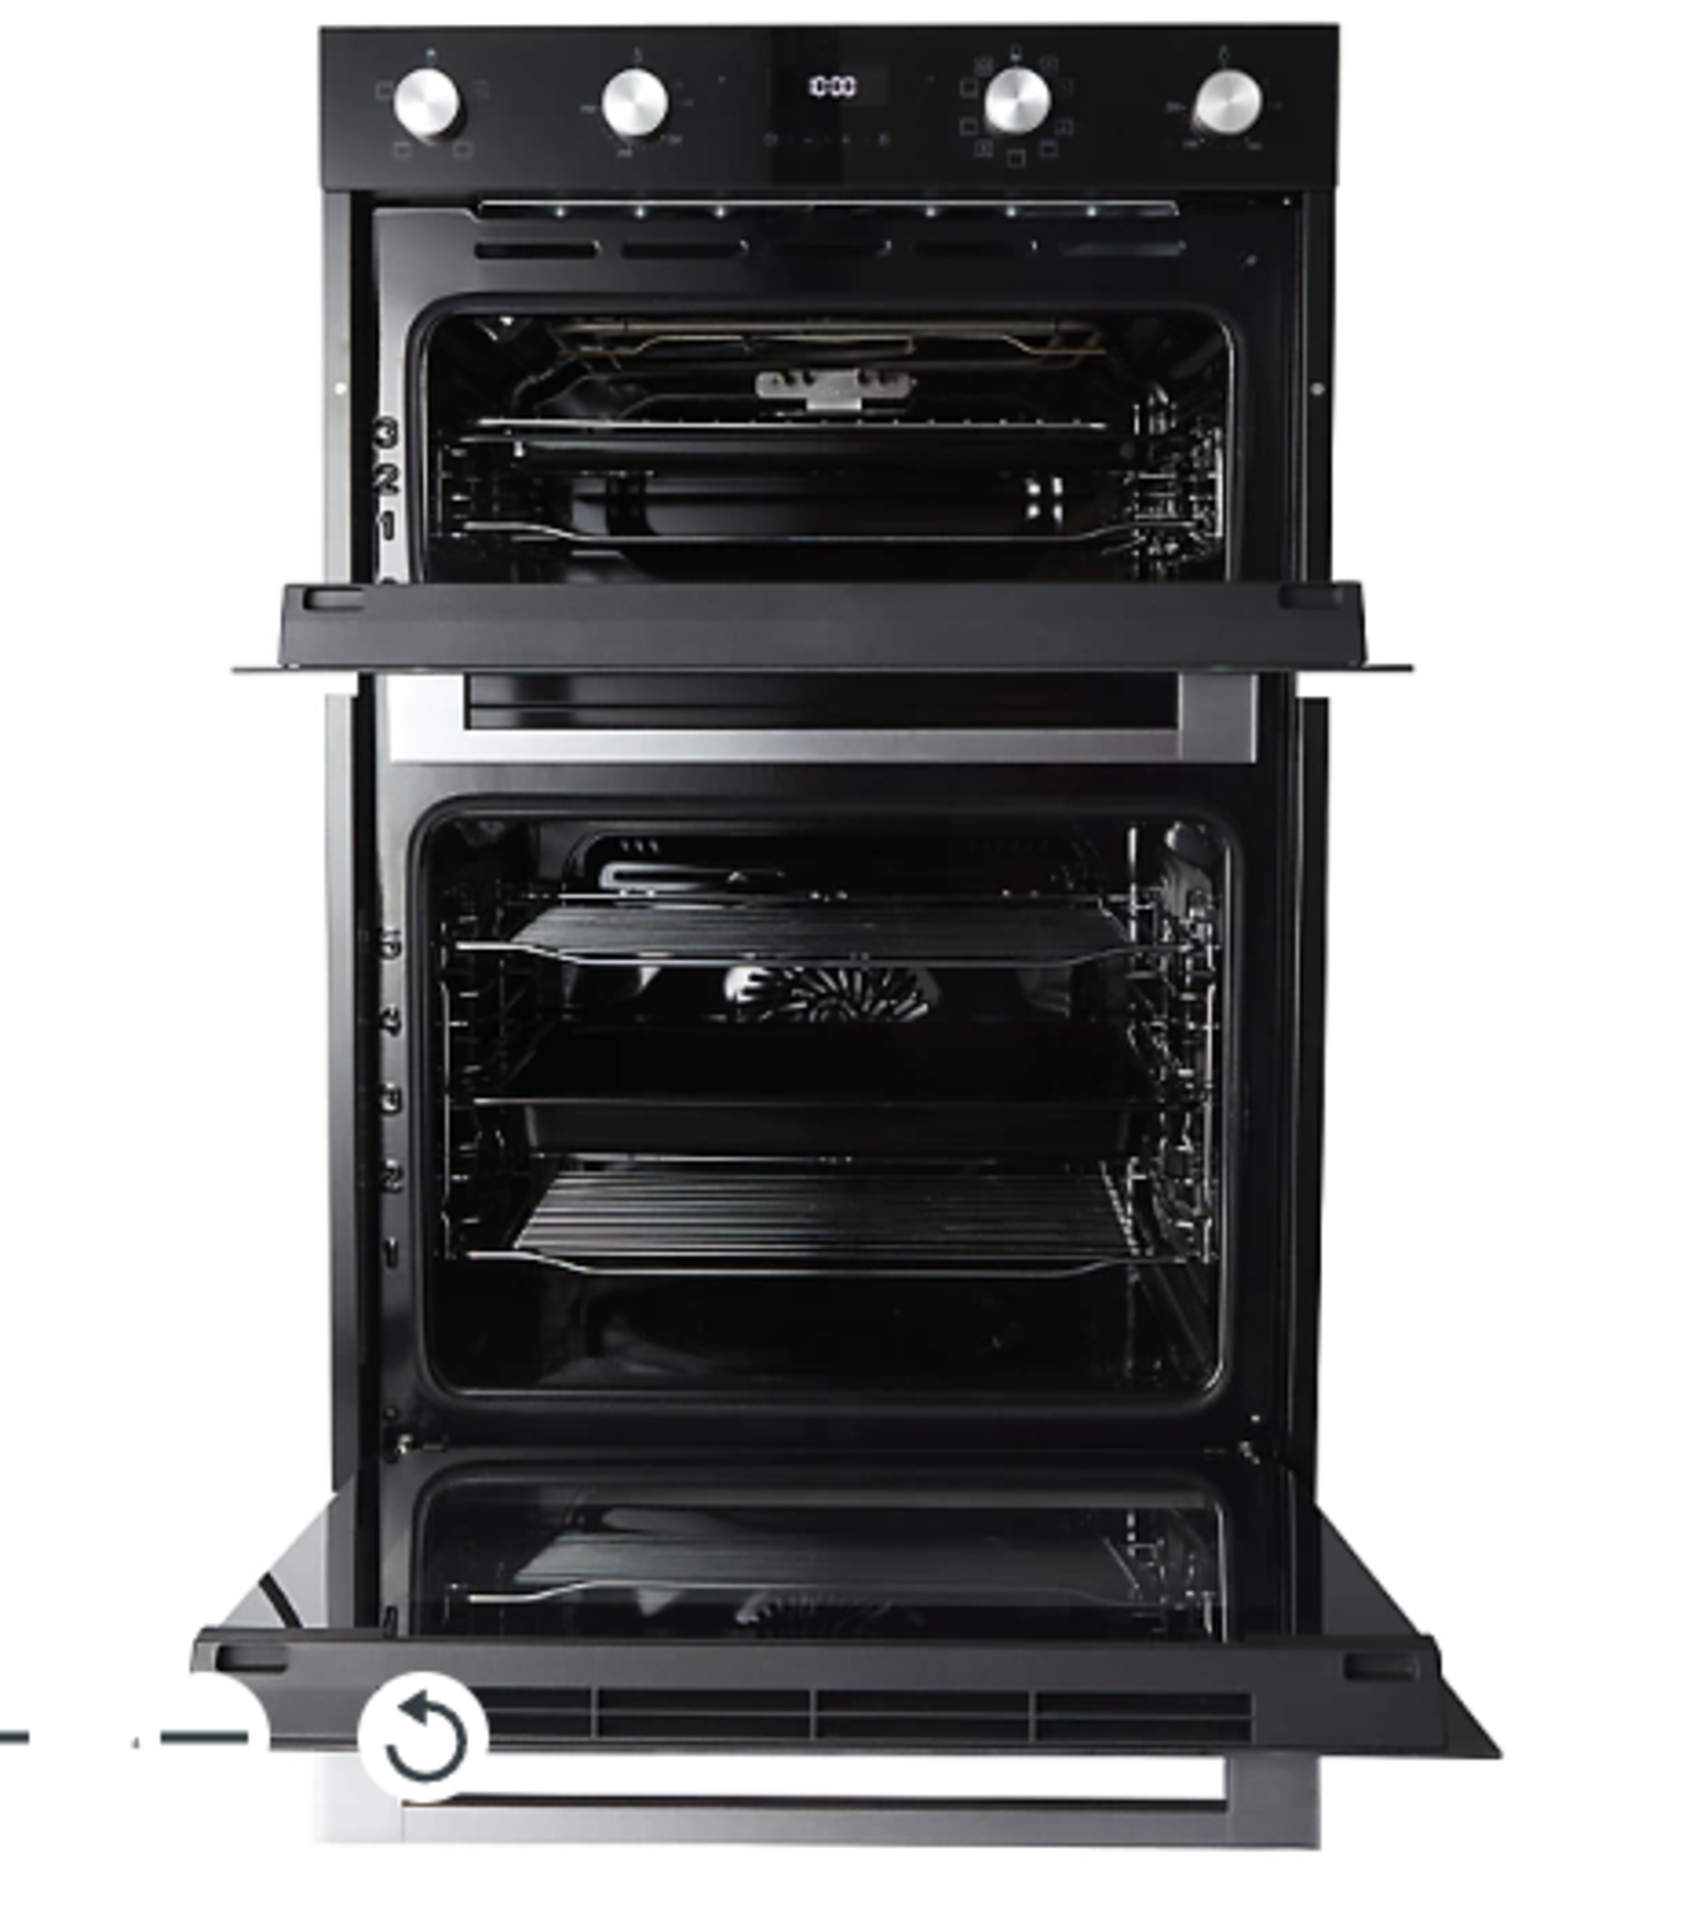 Cooke & Lewis CLELDO105 Built-in Double oven - Mirrored black. - ER46. RRP £466.00. Enjoy more - Image 2 of 2